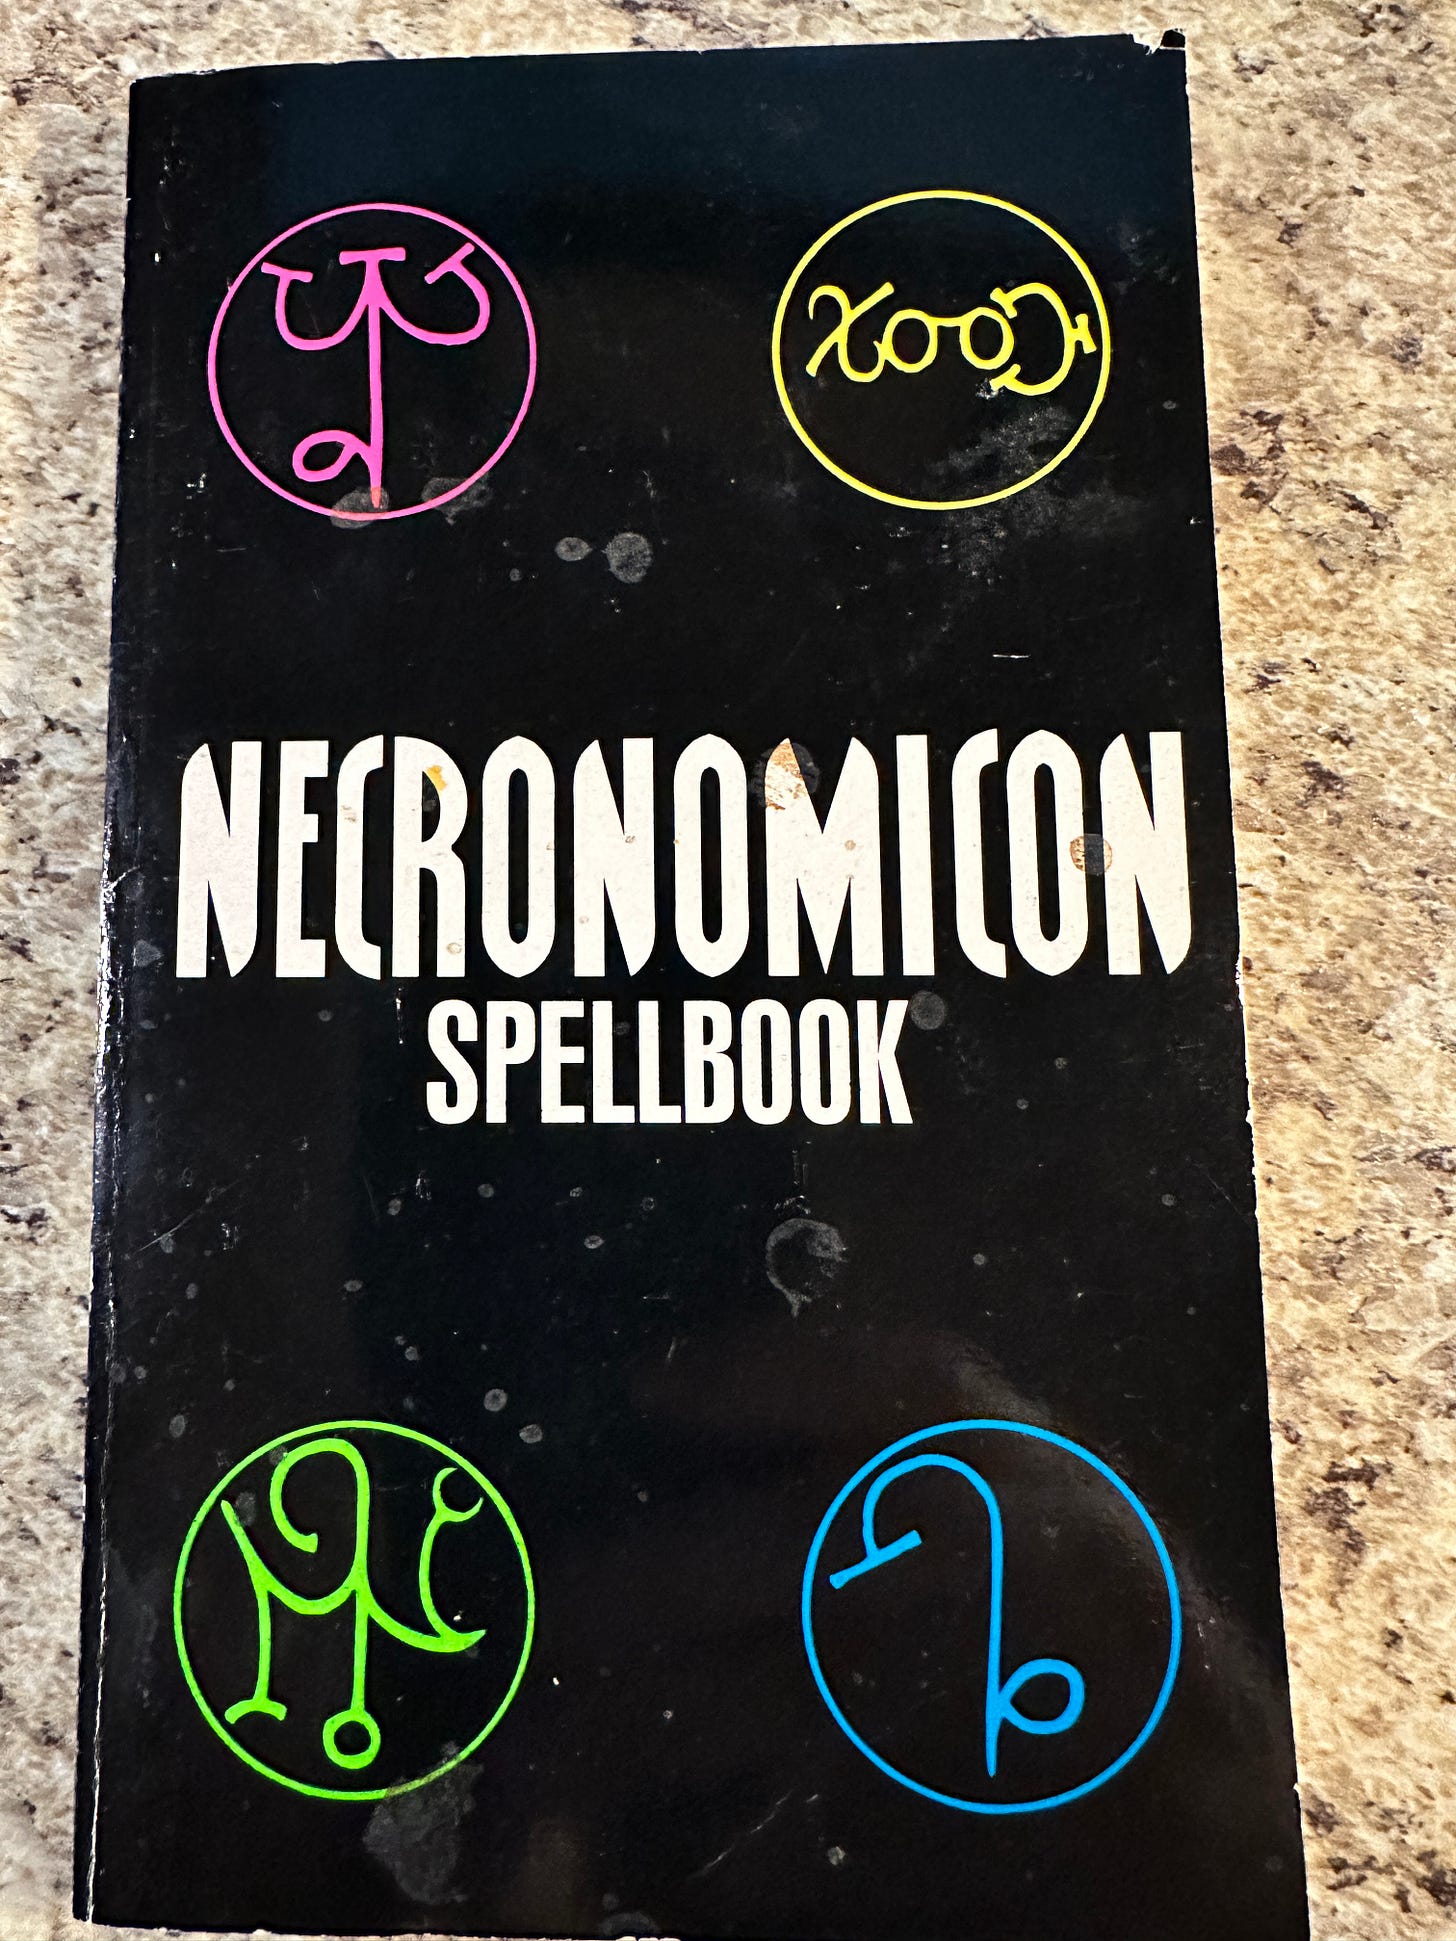 A dirty, used copy of the "Necronomicon Spellbook" paperback